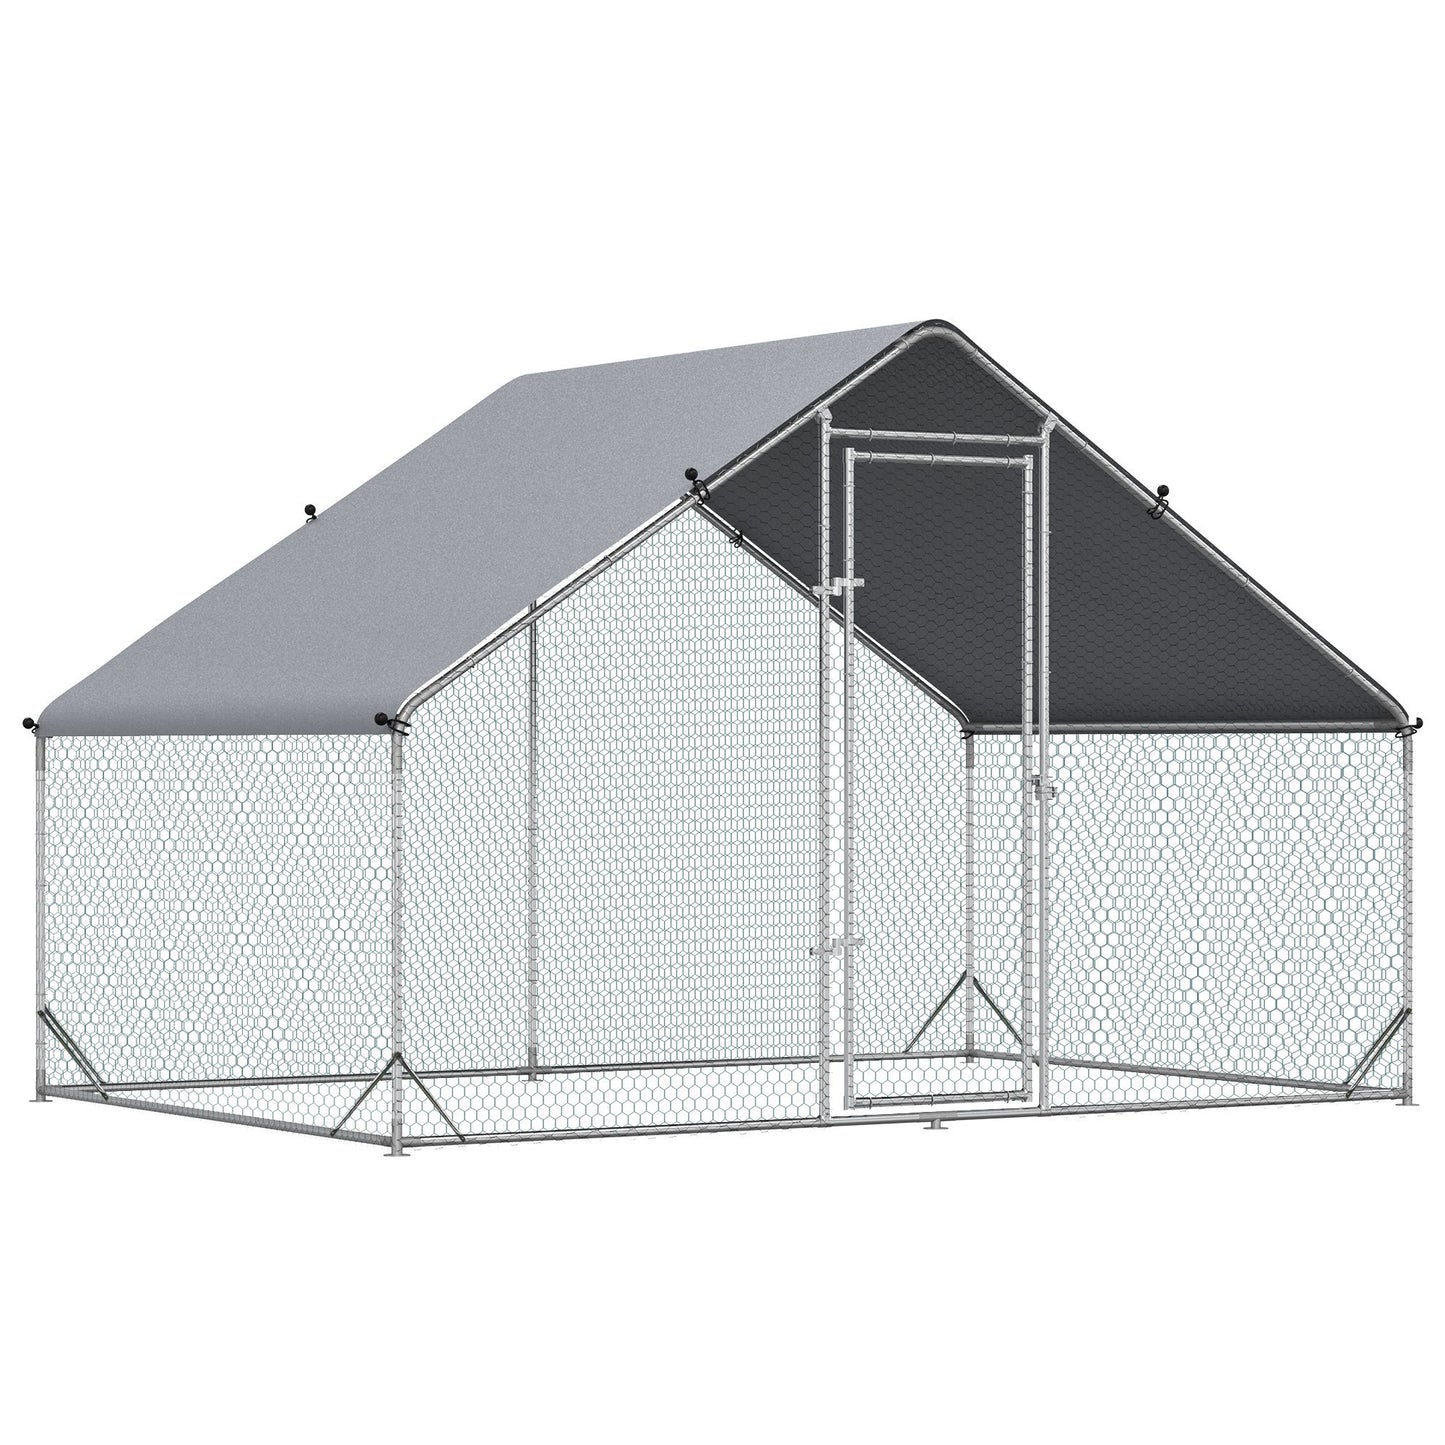 PawHut Metal Chicken Coop Run with Cover, Walk-In Outdoor Poultry Pen for Rabbits, Ducks, Large Hen House for Yard, 10' x 6.5' x 6.5', Silver